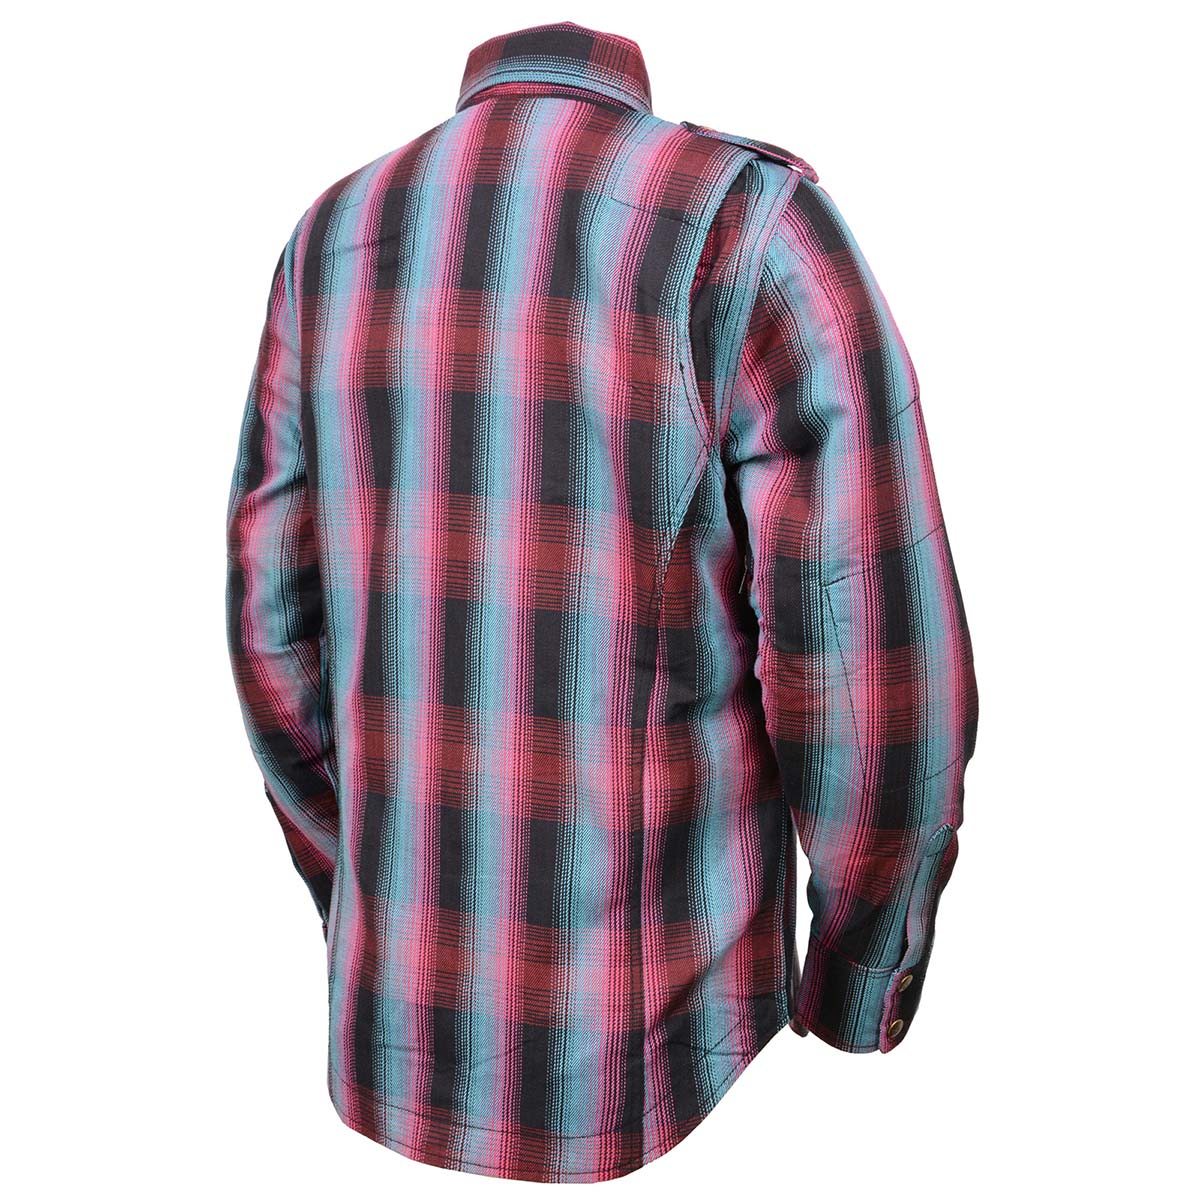 Milwaukee Leather MPL2603 Women’s Plaid Flannel Biker Shirt with CE Approved Armor - Reinforced w/ Aramid Fiber